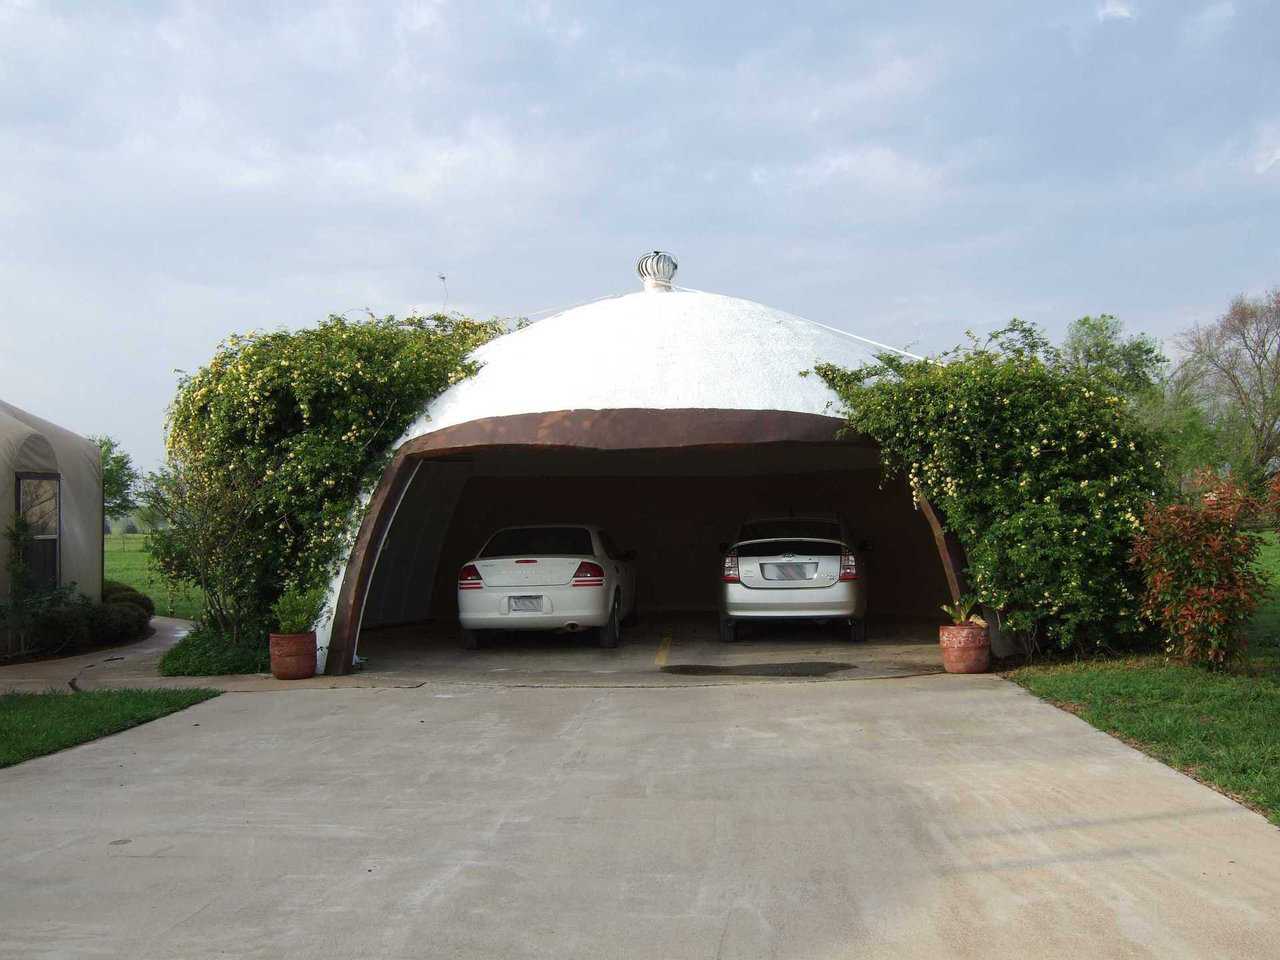 Garage — This two-car garage is a Monolithic EcoShell.